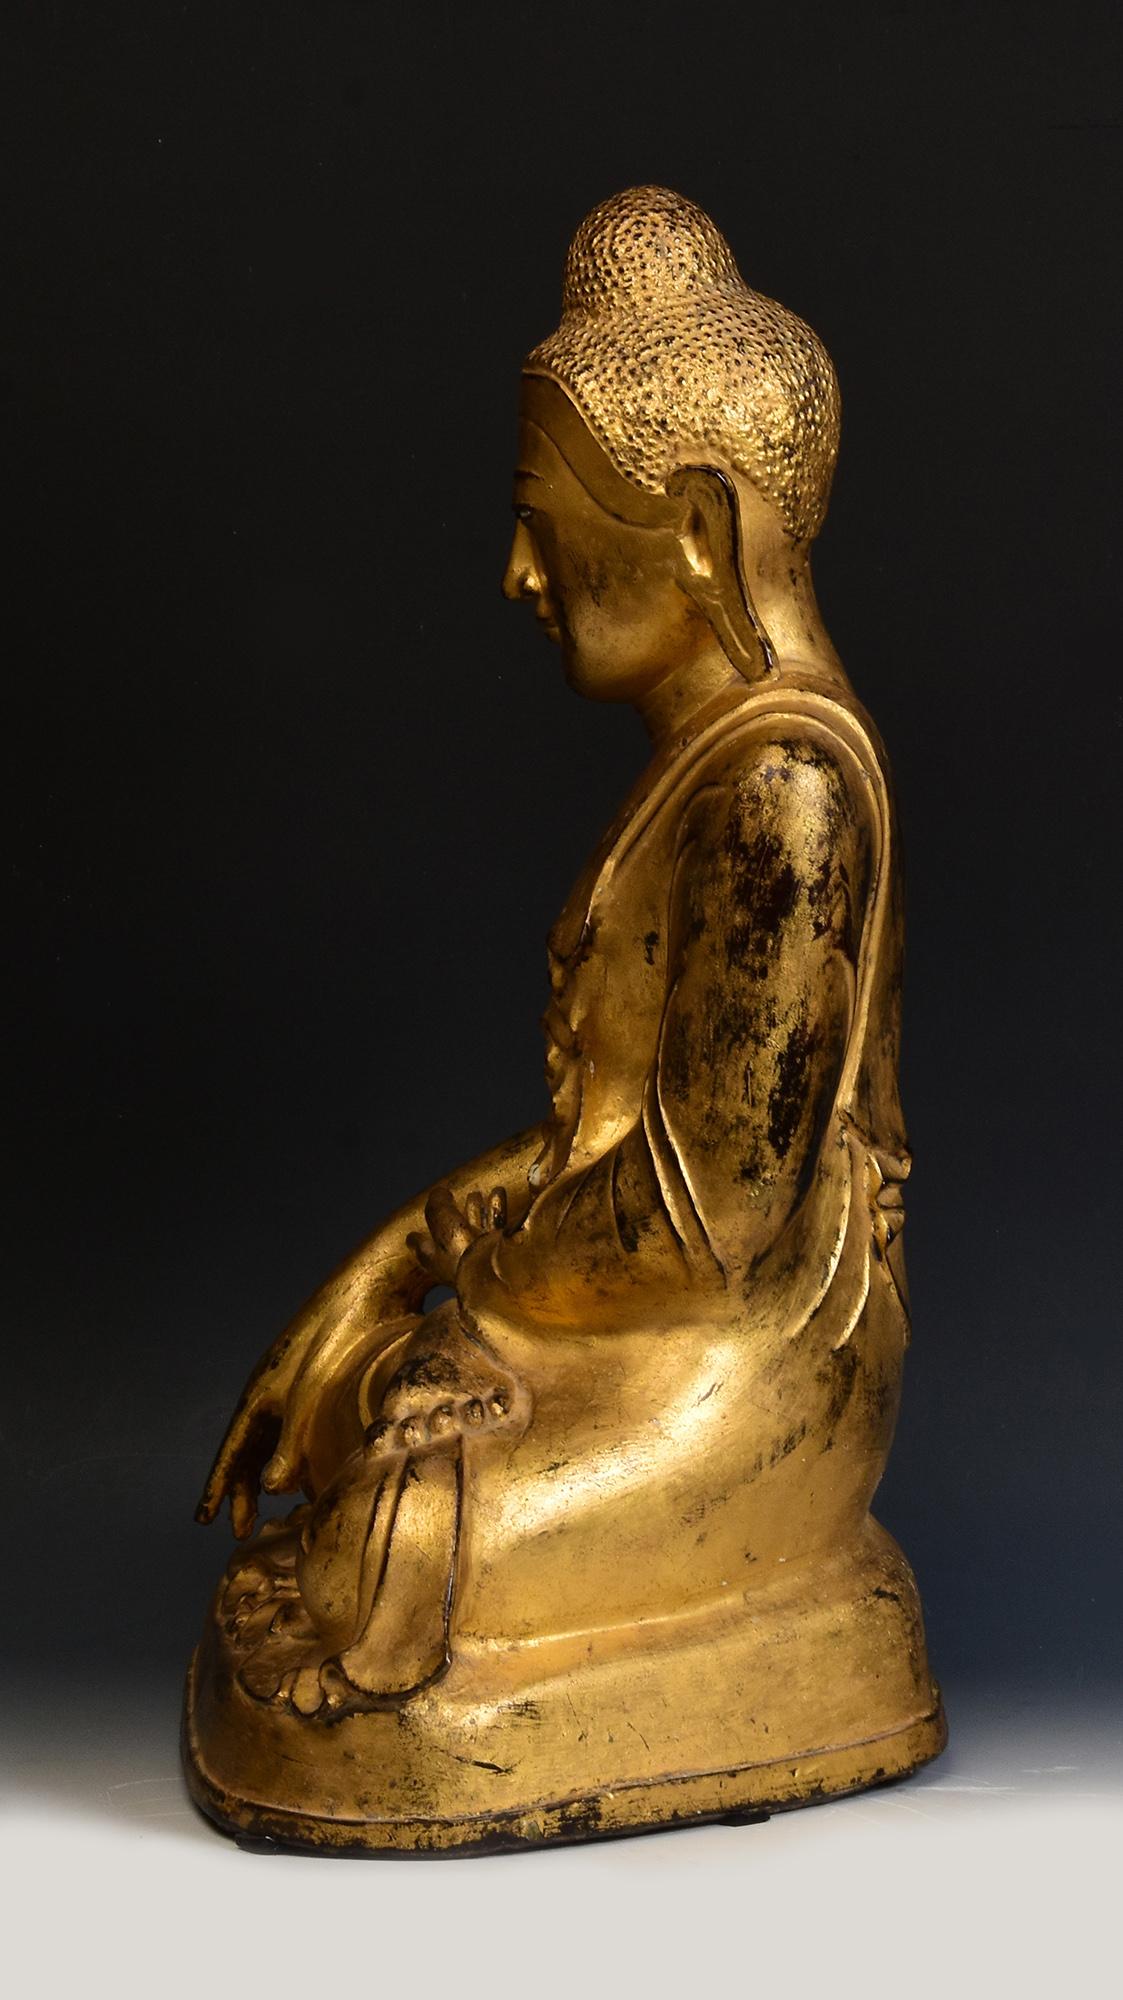 19th Century, Mandalay, Antique Burmese Bronze Seated Buddha with Gilded Gold For Sale 4